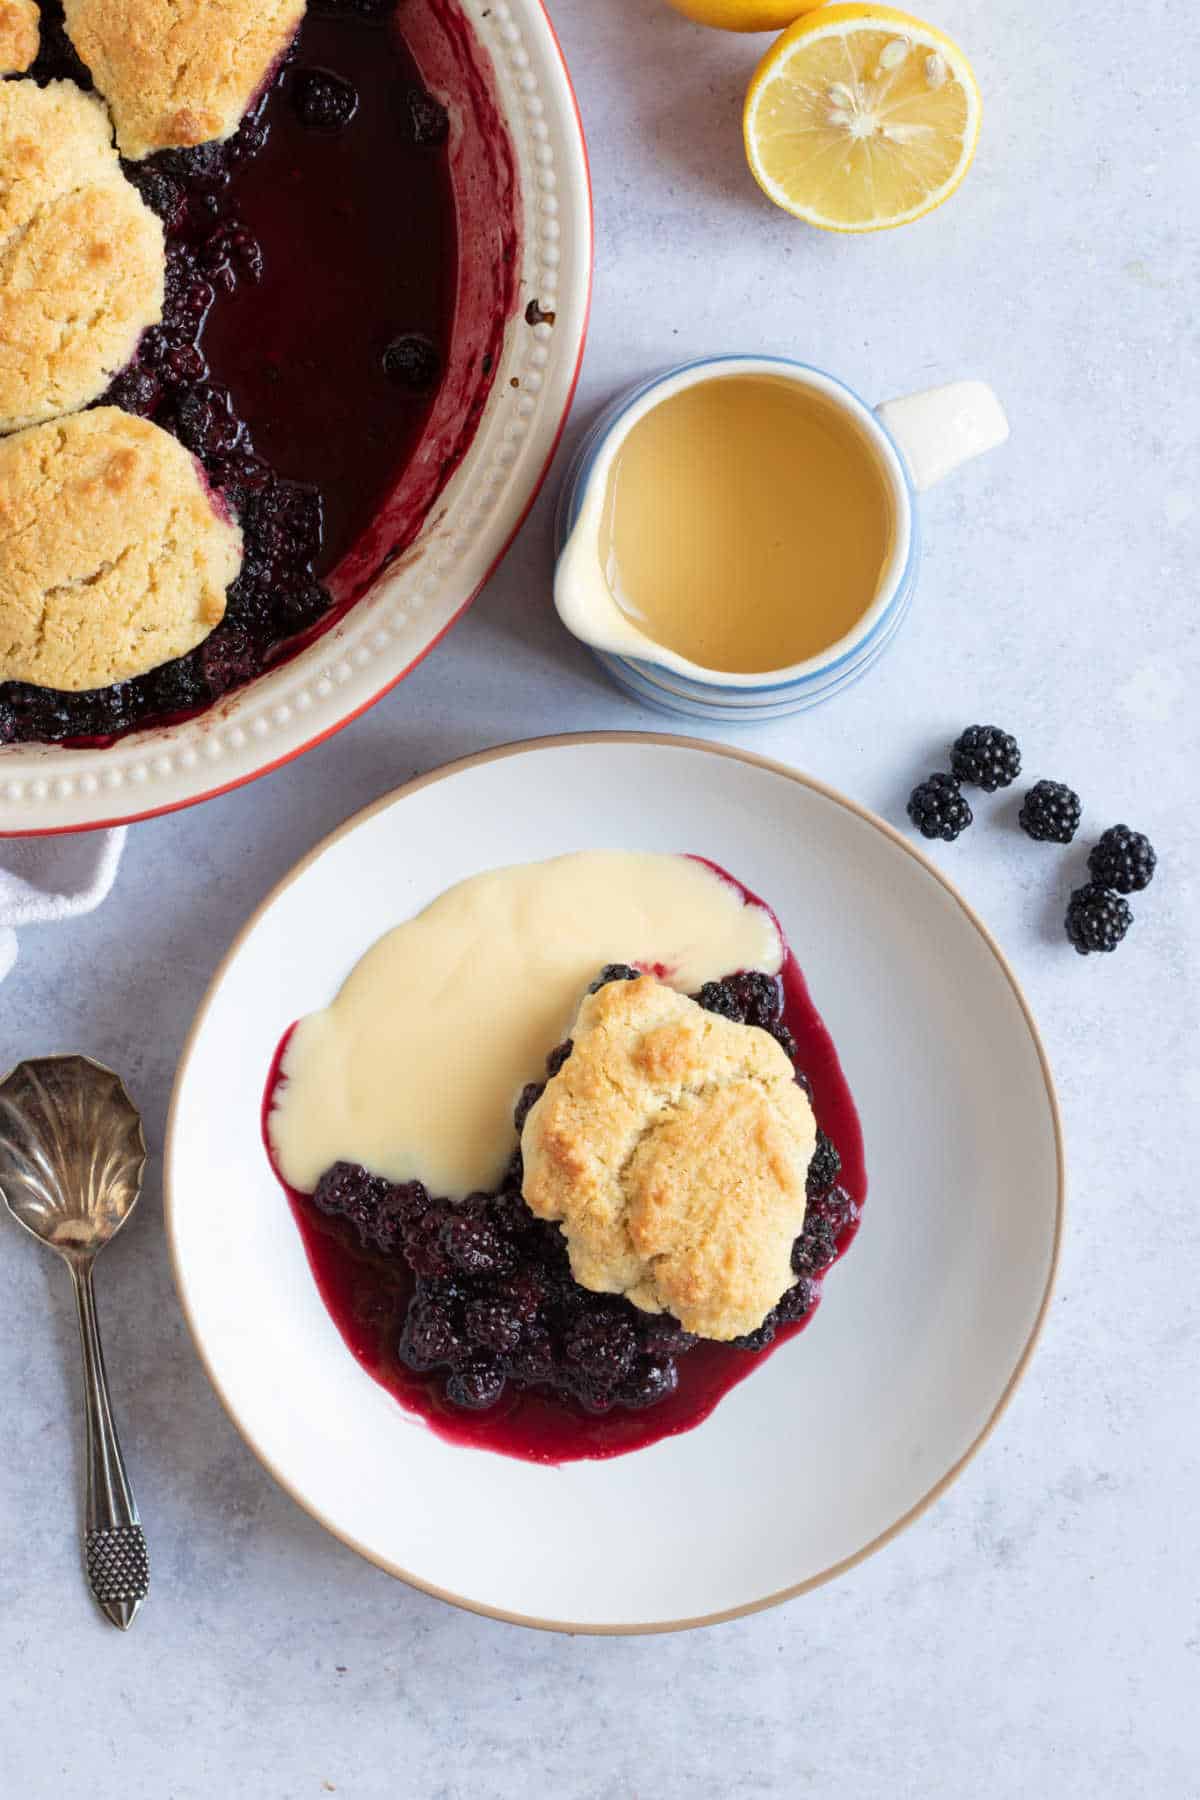 Blackberry cobbler in a baking dish with a jug of custard.